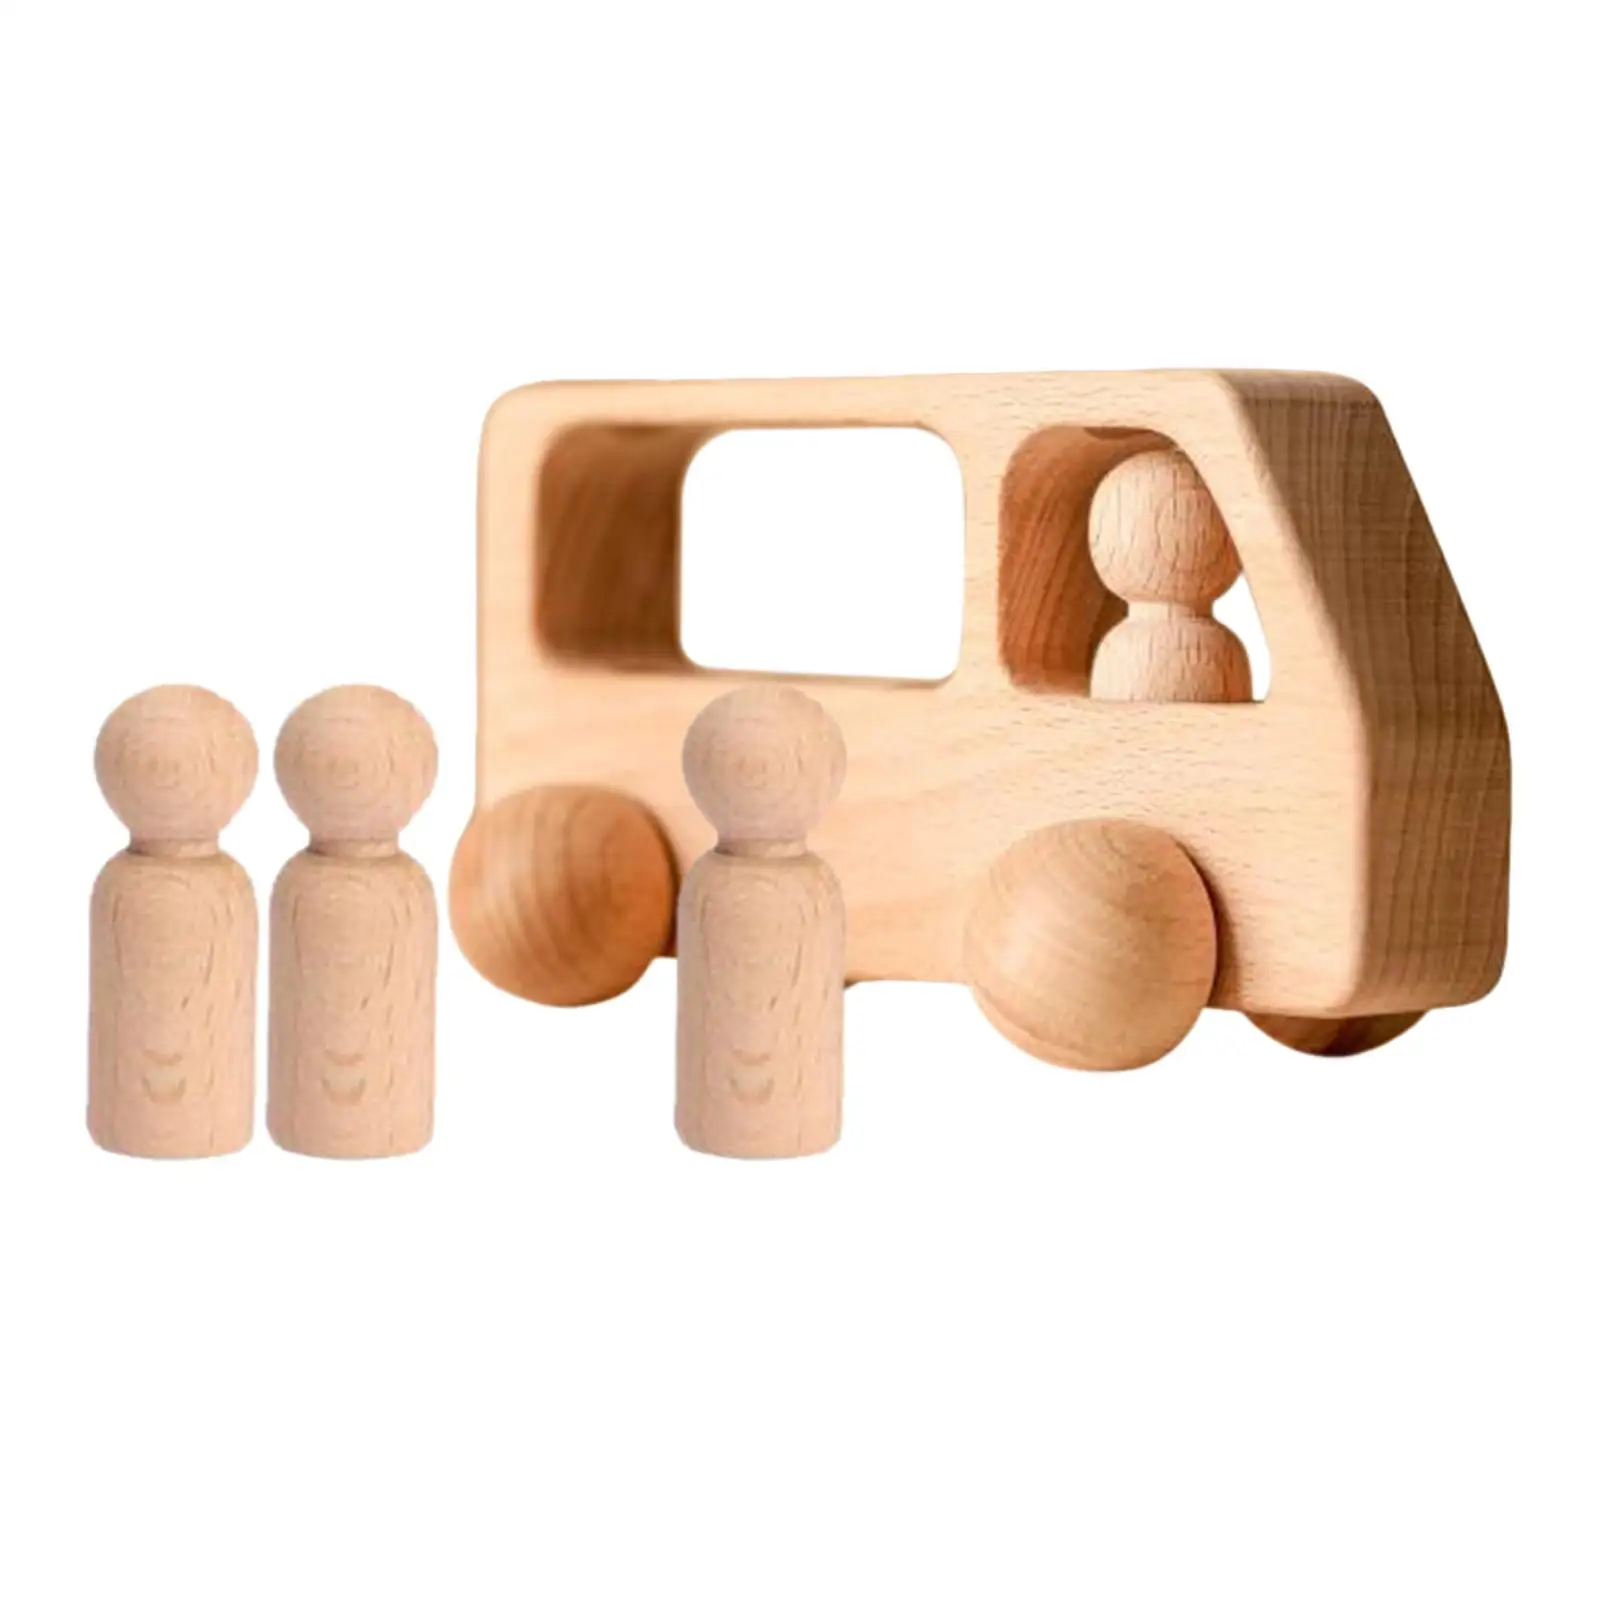 Wooden Bus Toy Learning Educational Toy Develop Fine Motor Skills Peg Dolls for Toddler